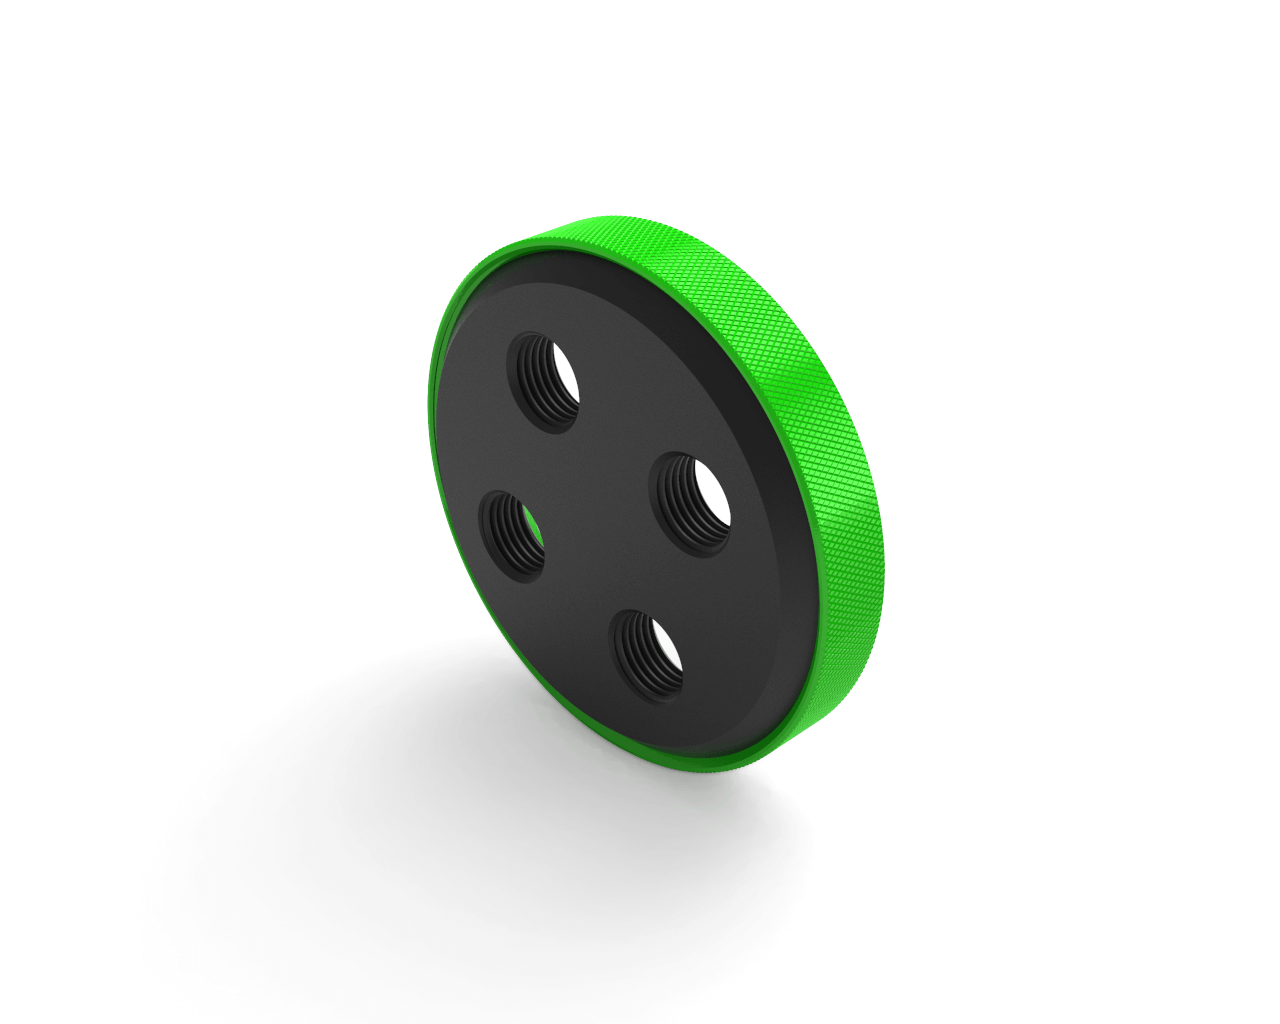 PrimoChill CTR Replacement SX Compression Ring - PrimoChill - KEEPING IT COOL UV Green